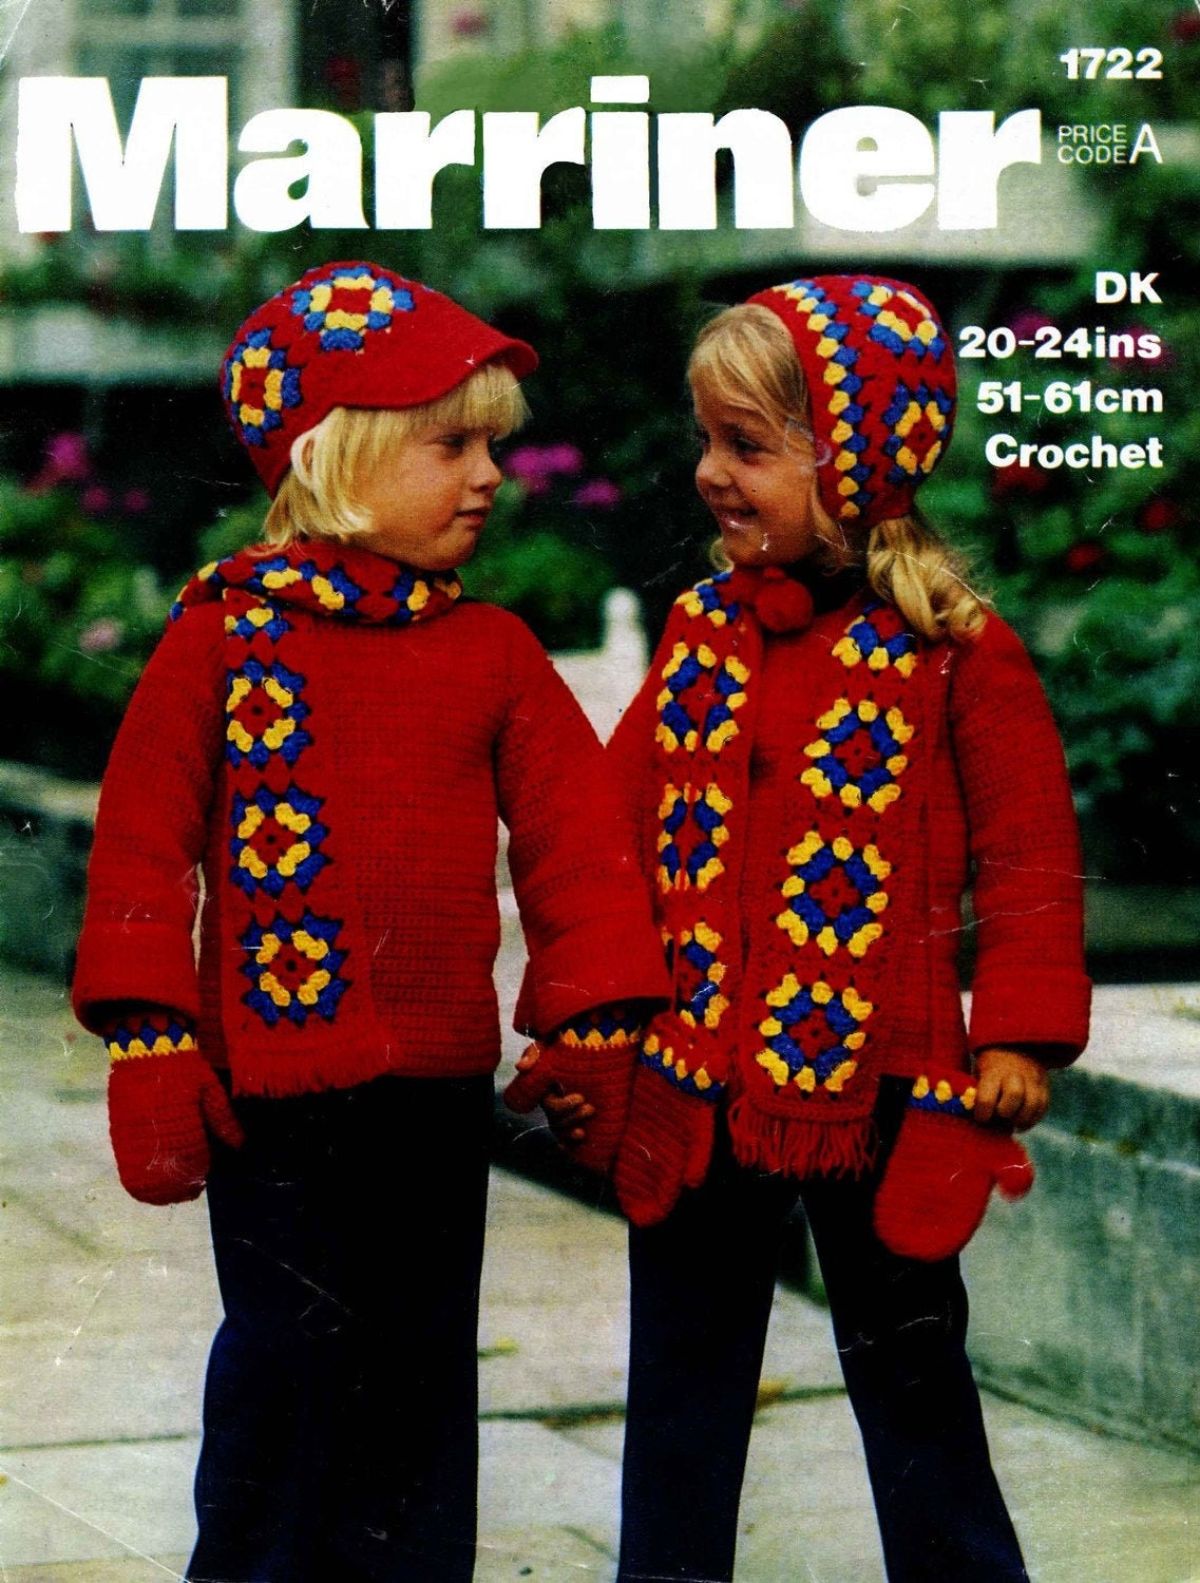 Cover of two blond children in red jumpers with vintage crochet hats and matching scarfs with yellow and blue square patterns standing outside.